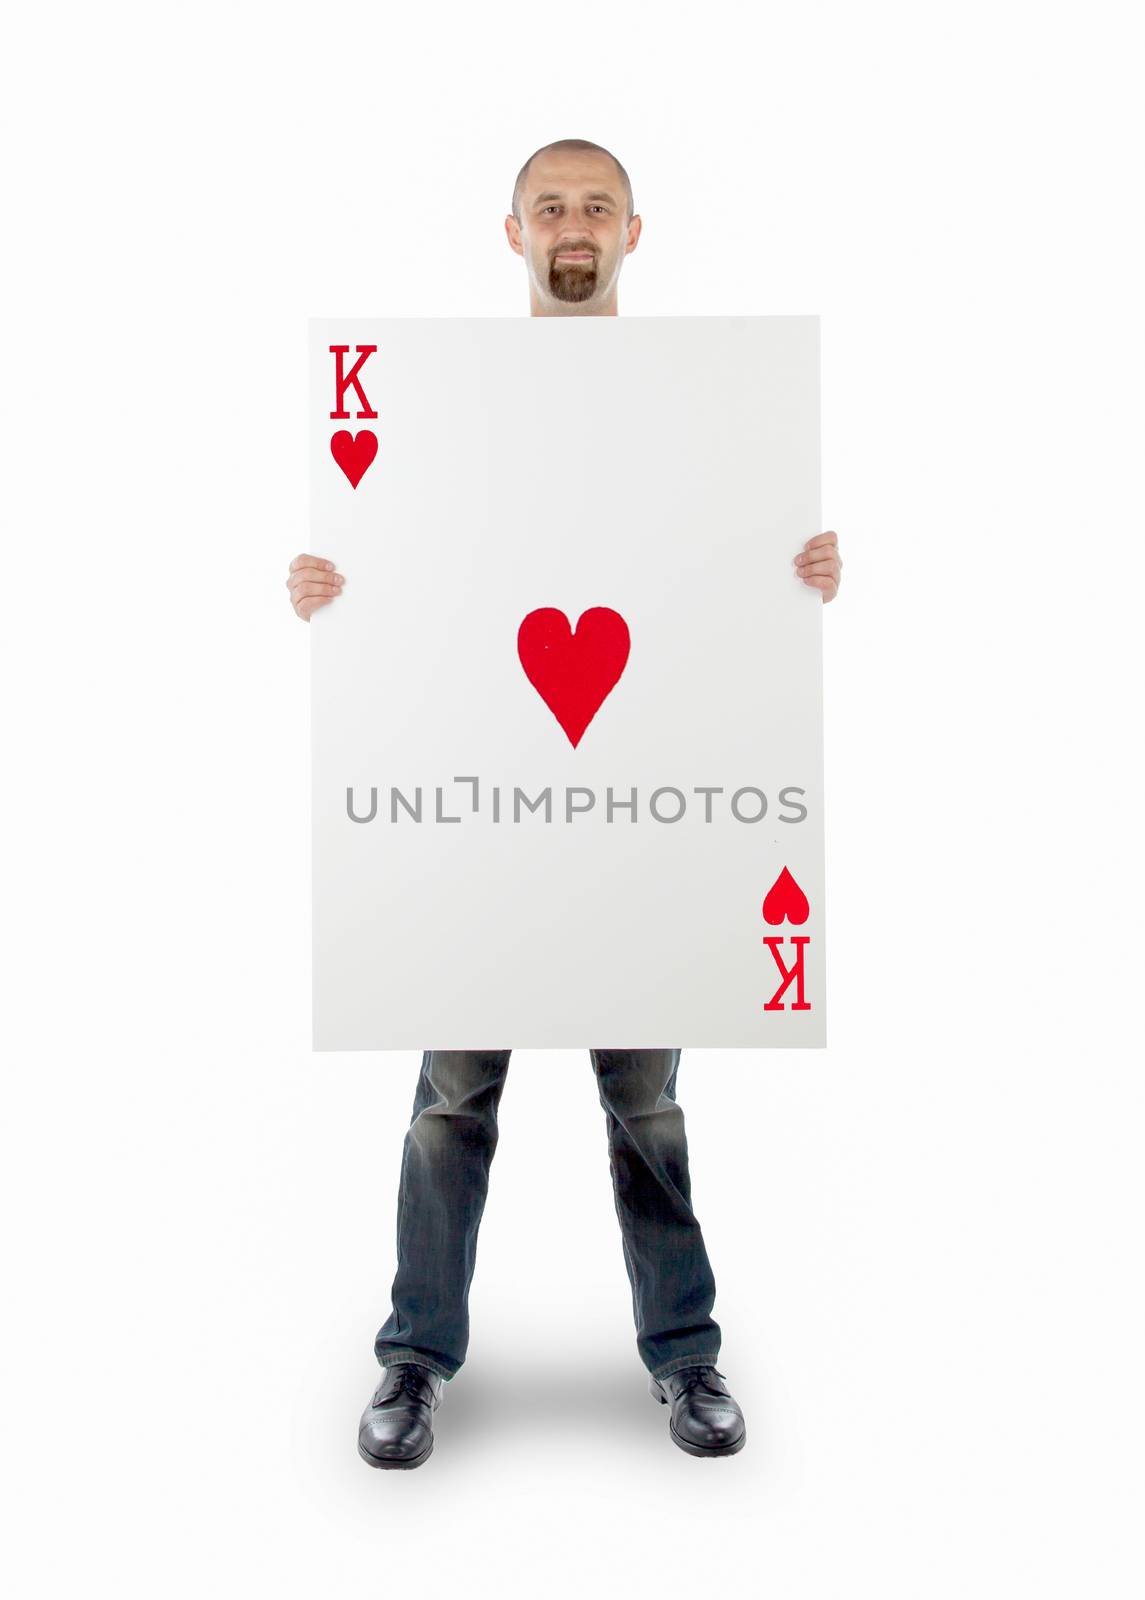 Businessman with large playing card - King of hearts